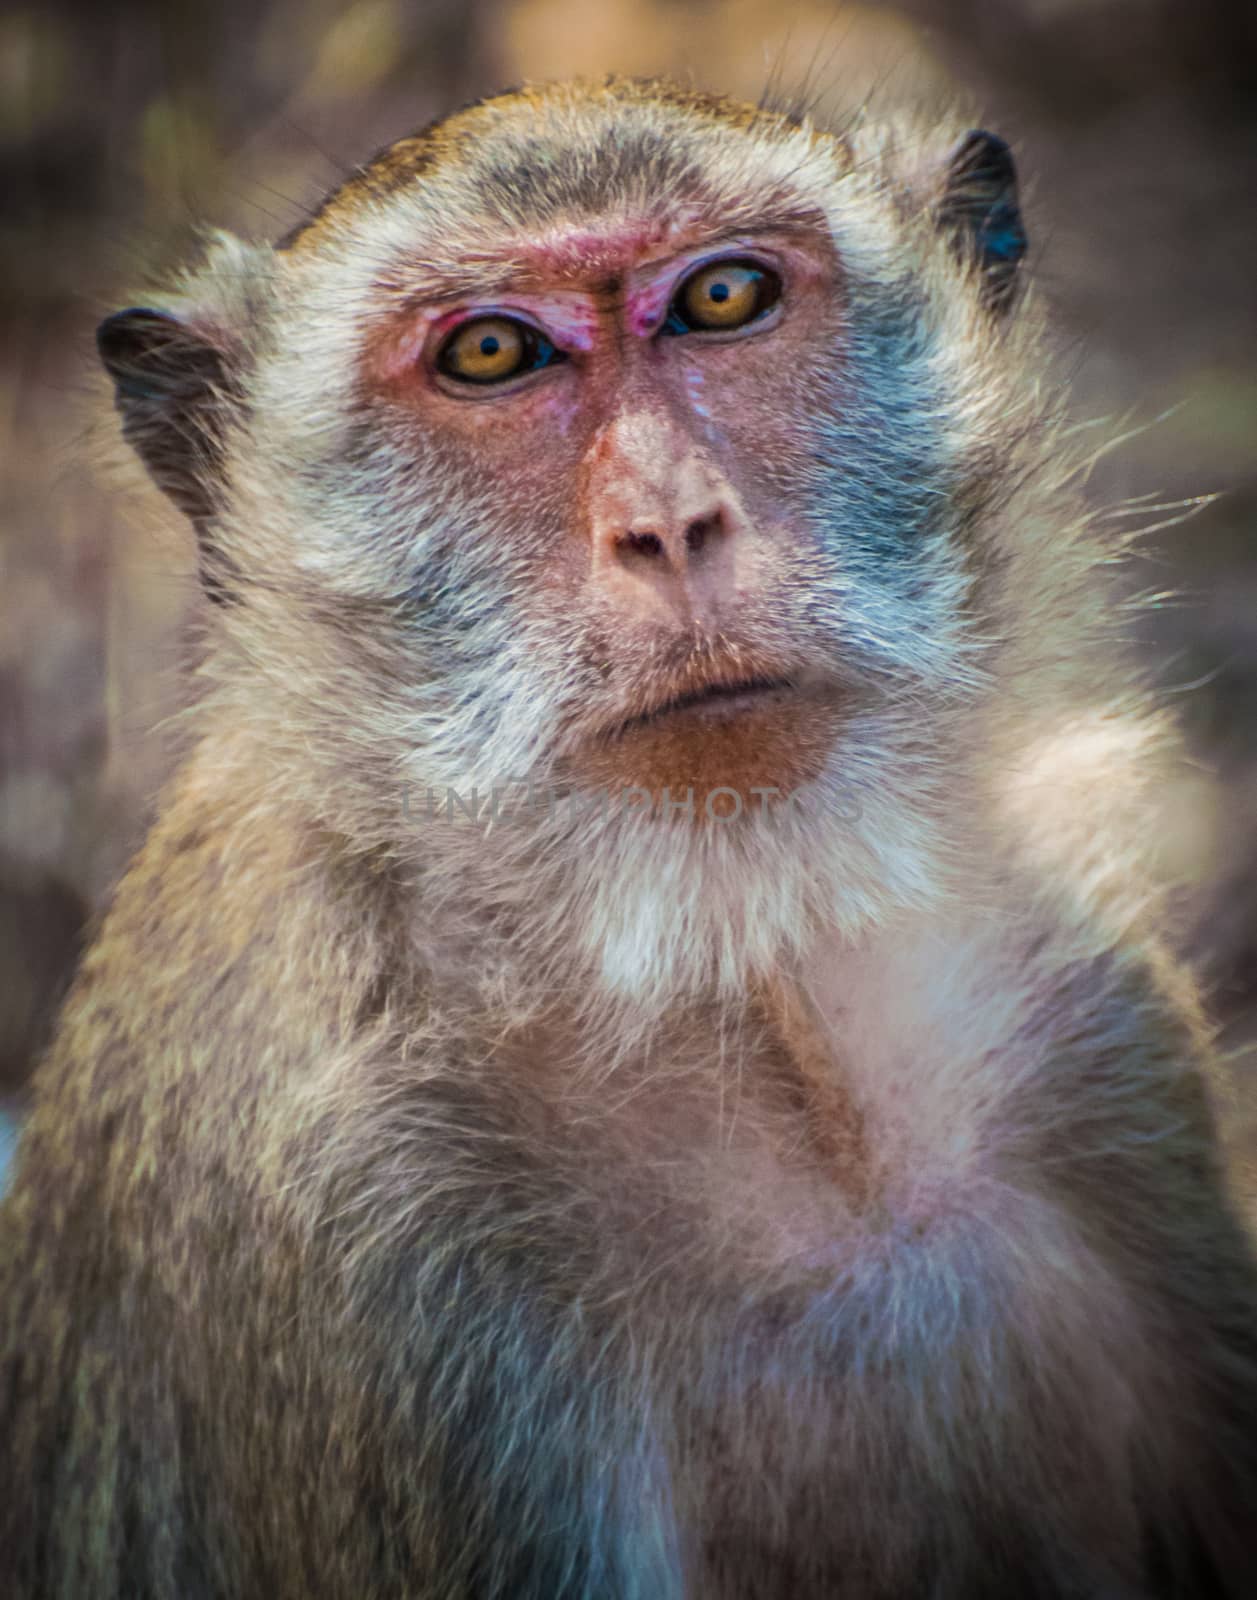 Saw this Monkey in Thailand on the side of the road looking at the camera